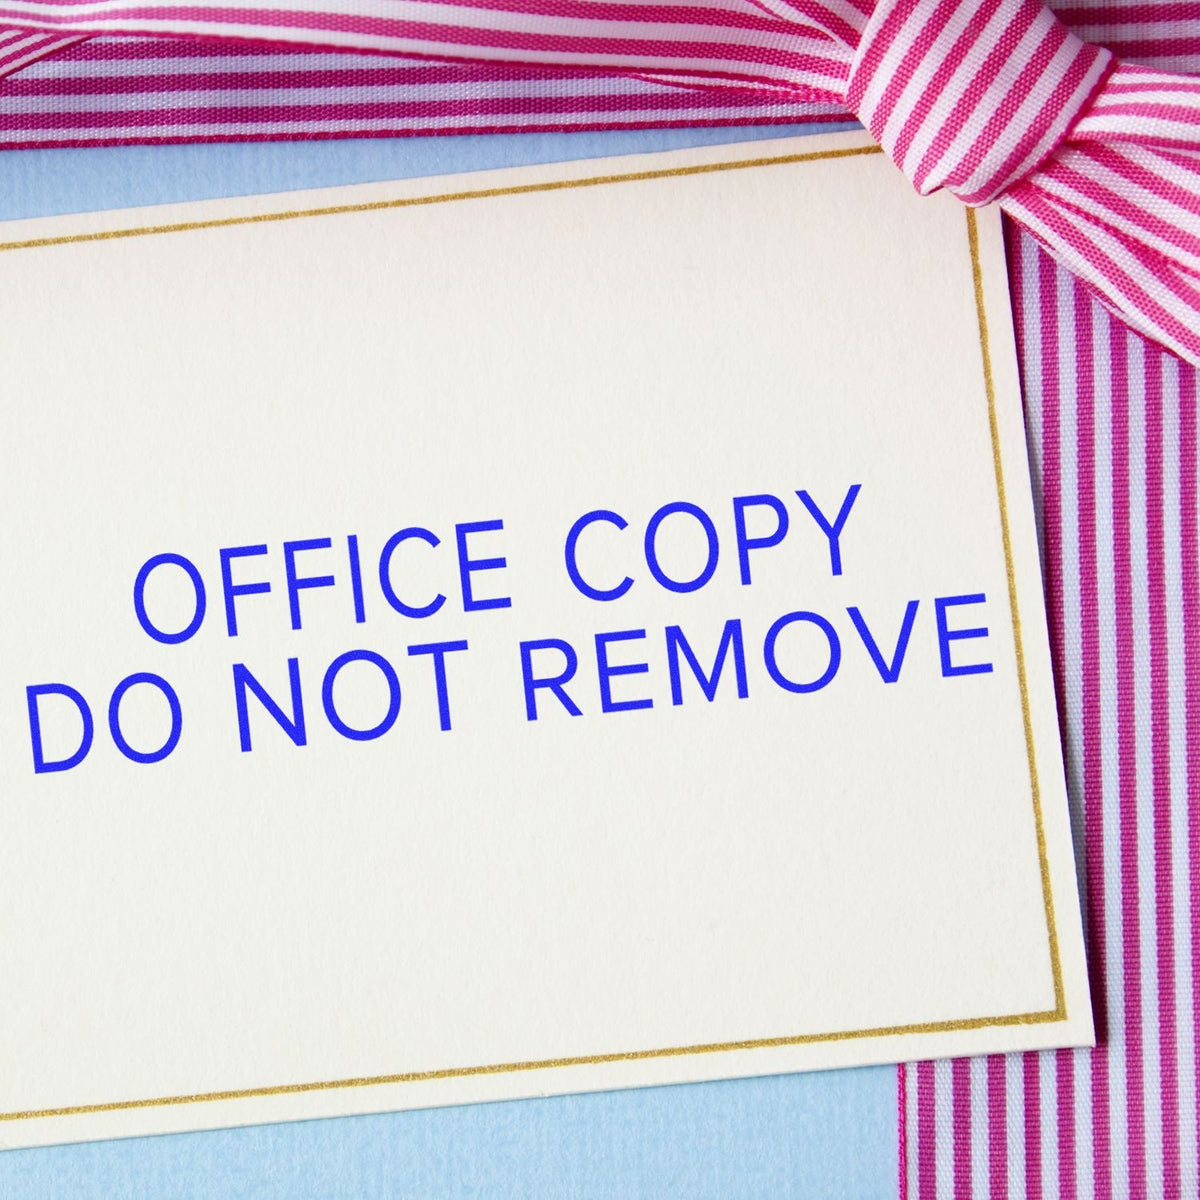 Self-Inking Narrow Font Office Copy Do Not Remove Stamp In Use Photo